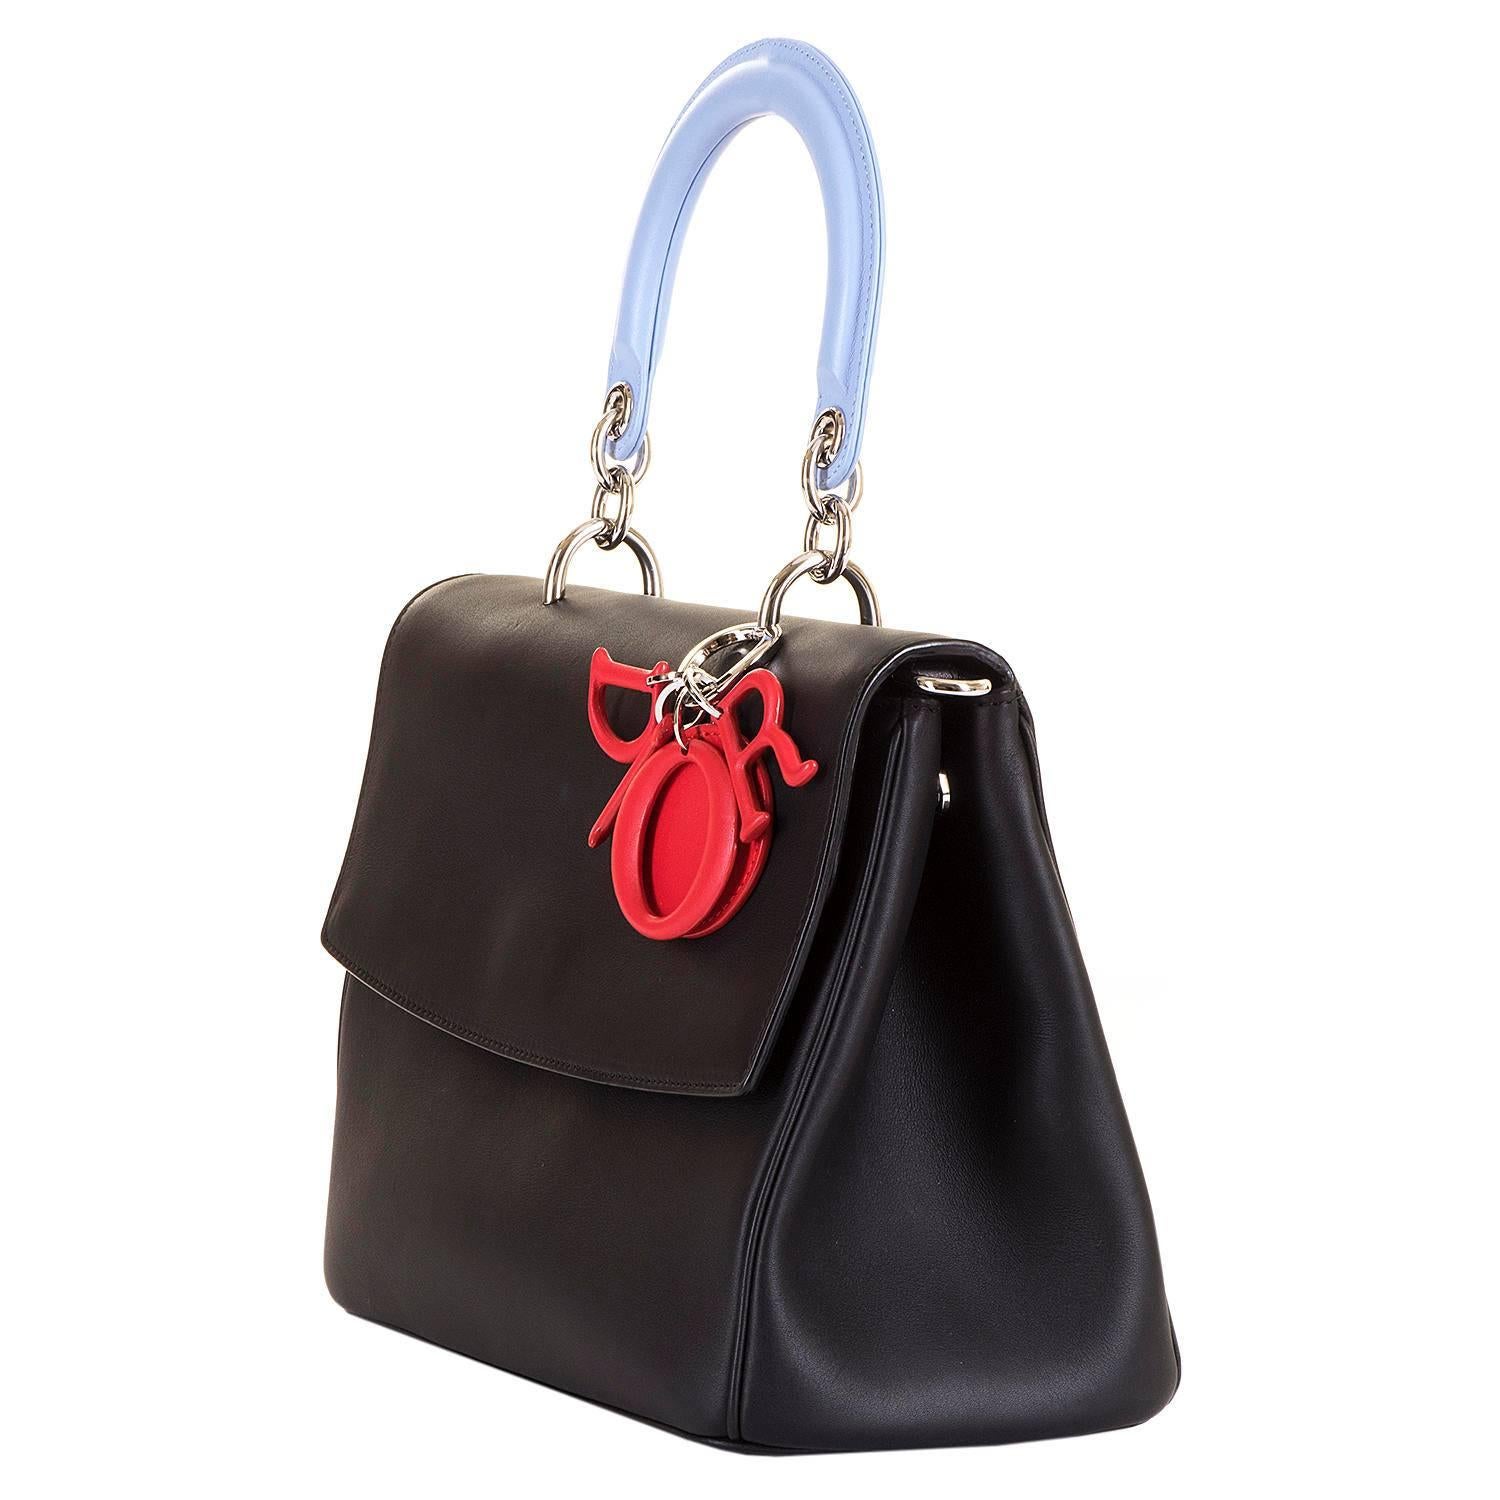 A simply stunning and Rare, Limited Edition, Dior 'Be Dior' tricolour Handbag & Shoulder Bag. In pristine 'Store-Fresh' condition the bag is finished in Matt Black, Poster Red & Wedgwood Blue, enhanced with Silver Palladium Hardware. The